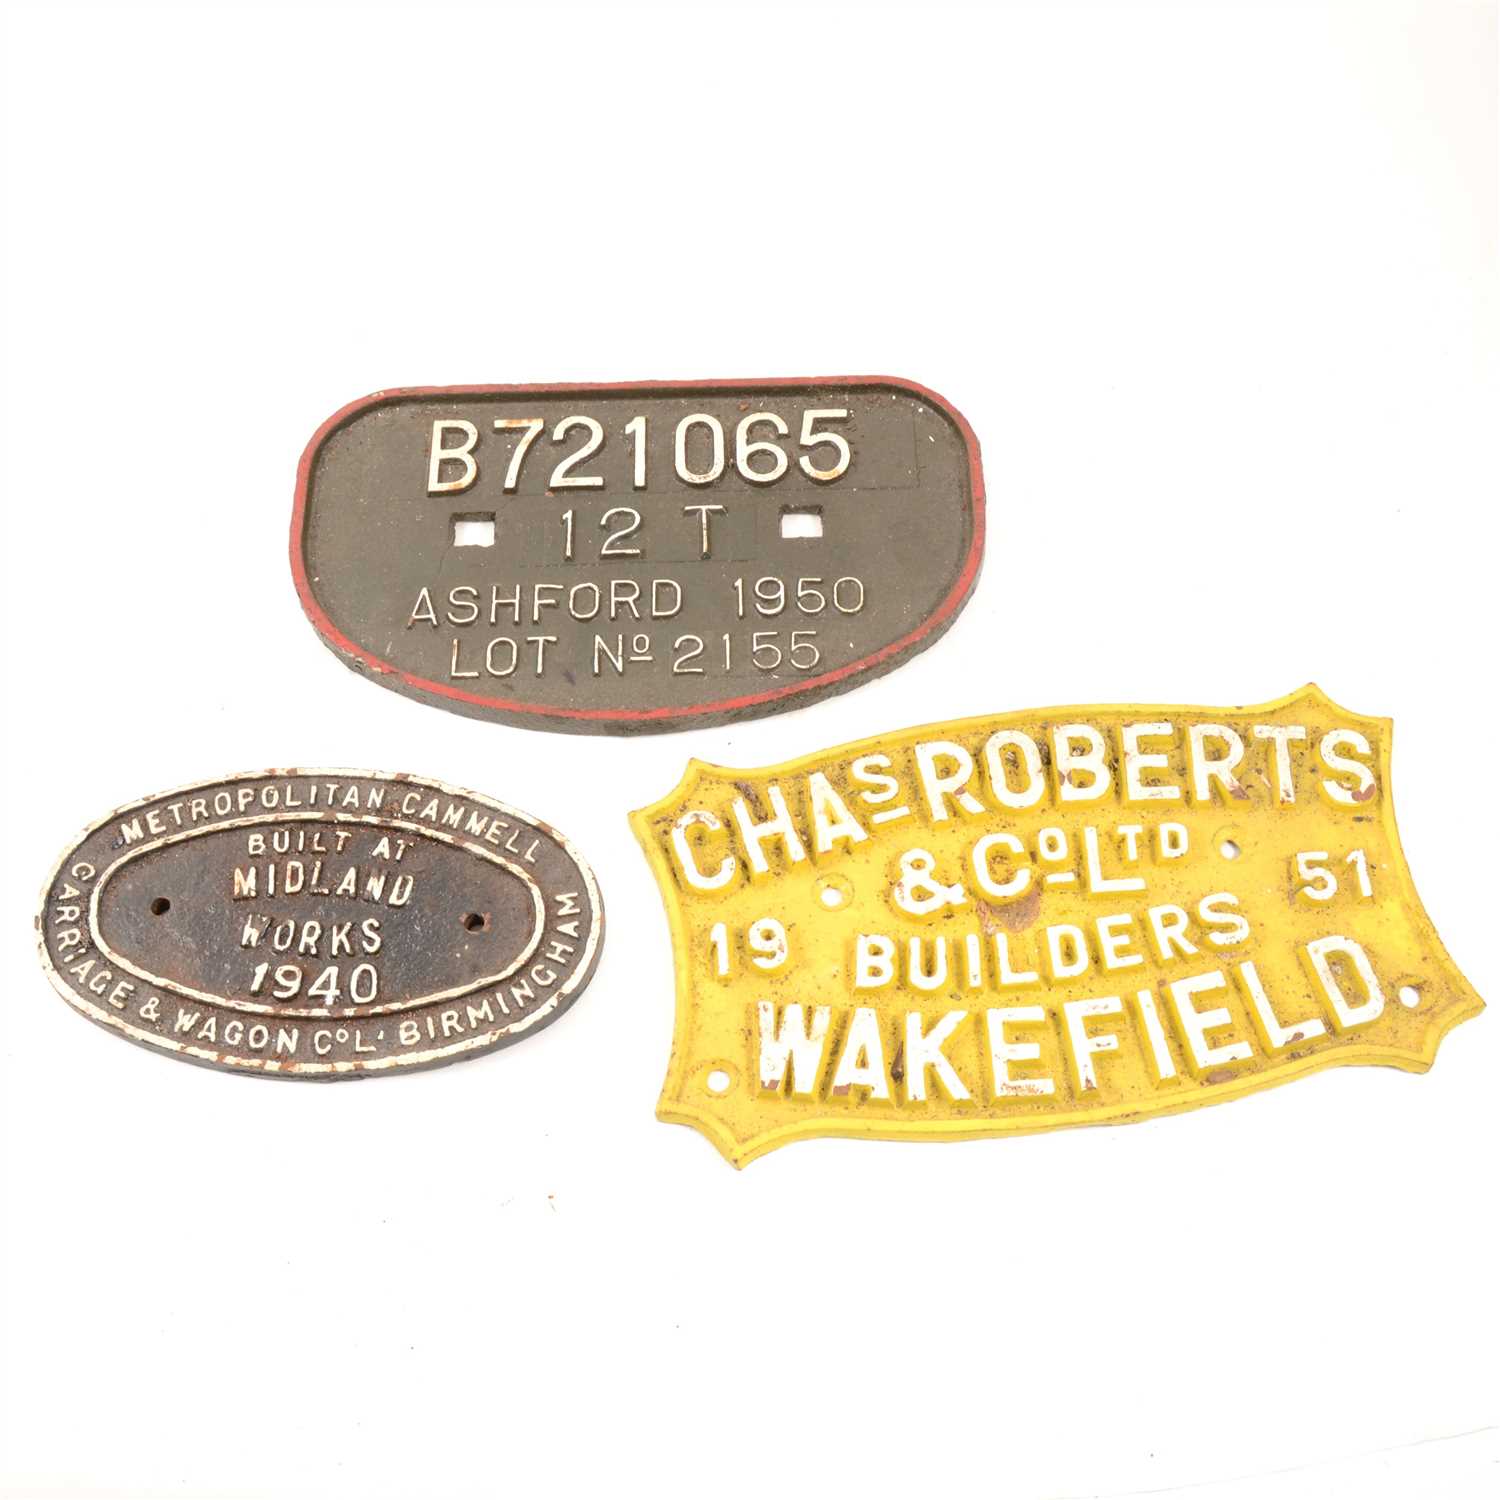 Lot 128 - Ten locomotive and other cast iron plates - LMS Wolverton 1836, three "Due For Paint 1965", Metropolitan Cammell Built at Midland Works 1960, Chas. Roberts & Co Ltd Builders Wakefield etc